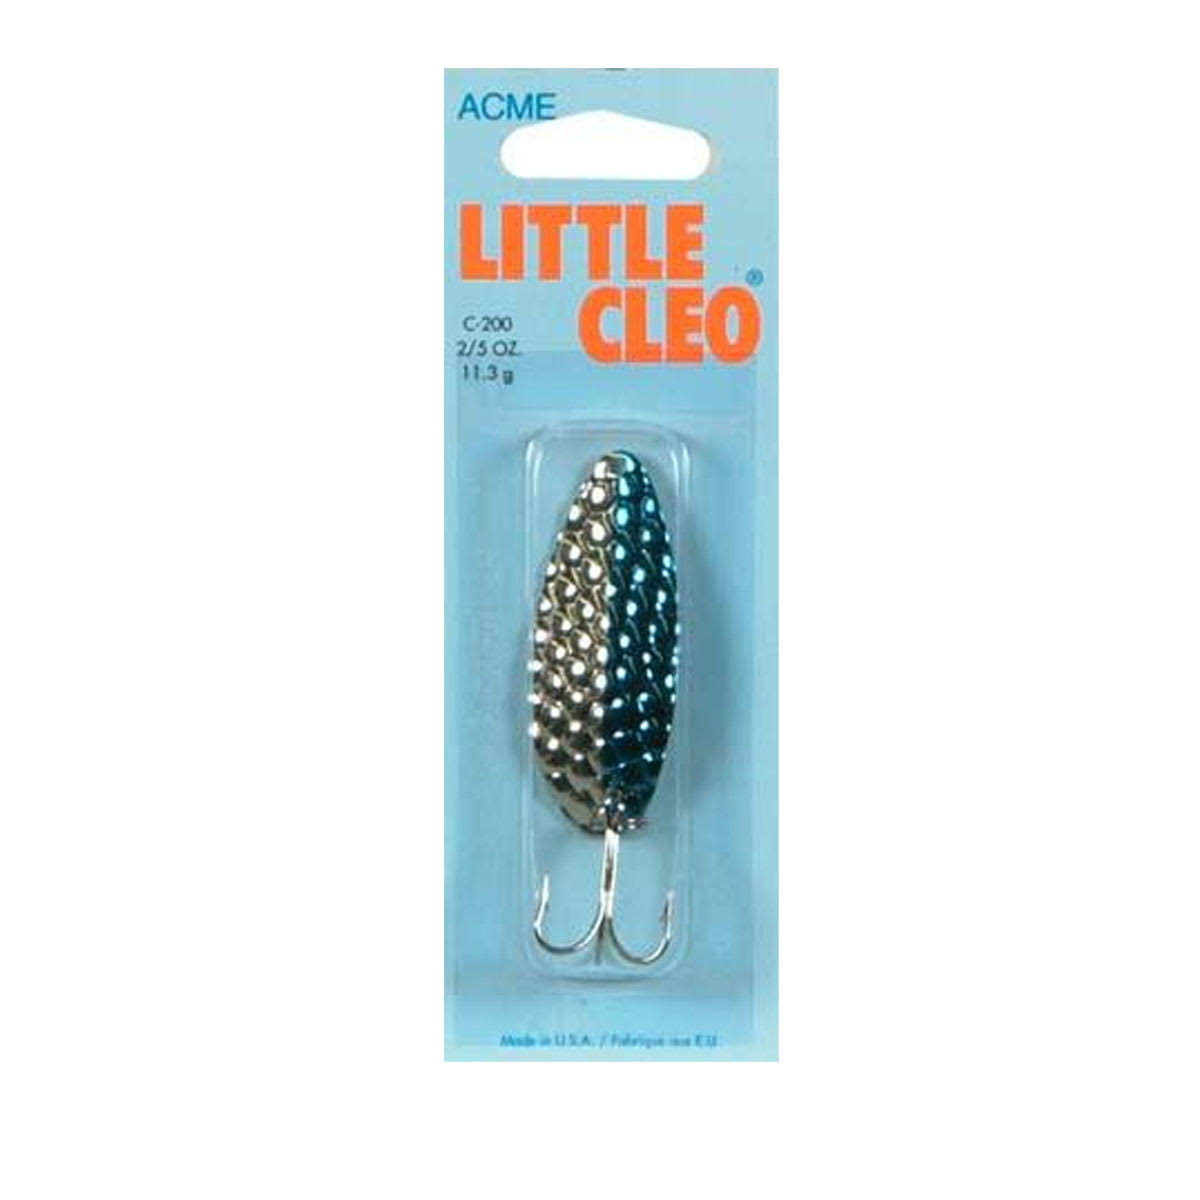 Acme Little Cleo Fishing Terminal Tackle Spoon Lure 2/5oz Hummered Neon C200/hnb... Multicolor